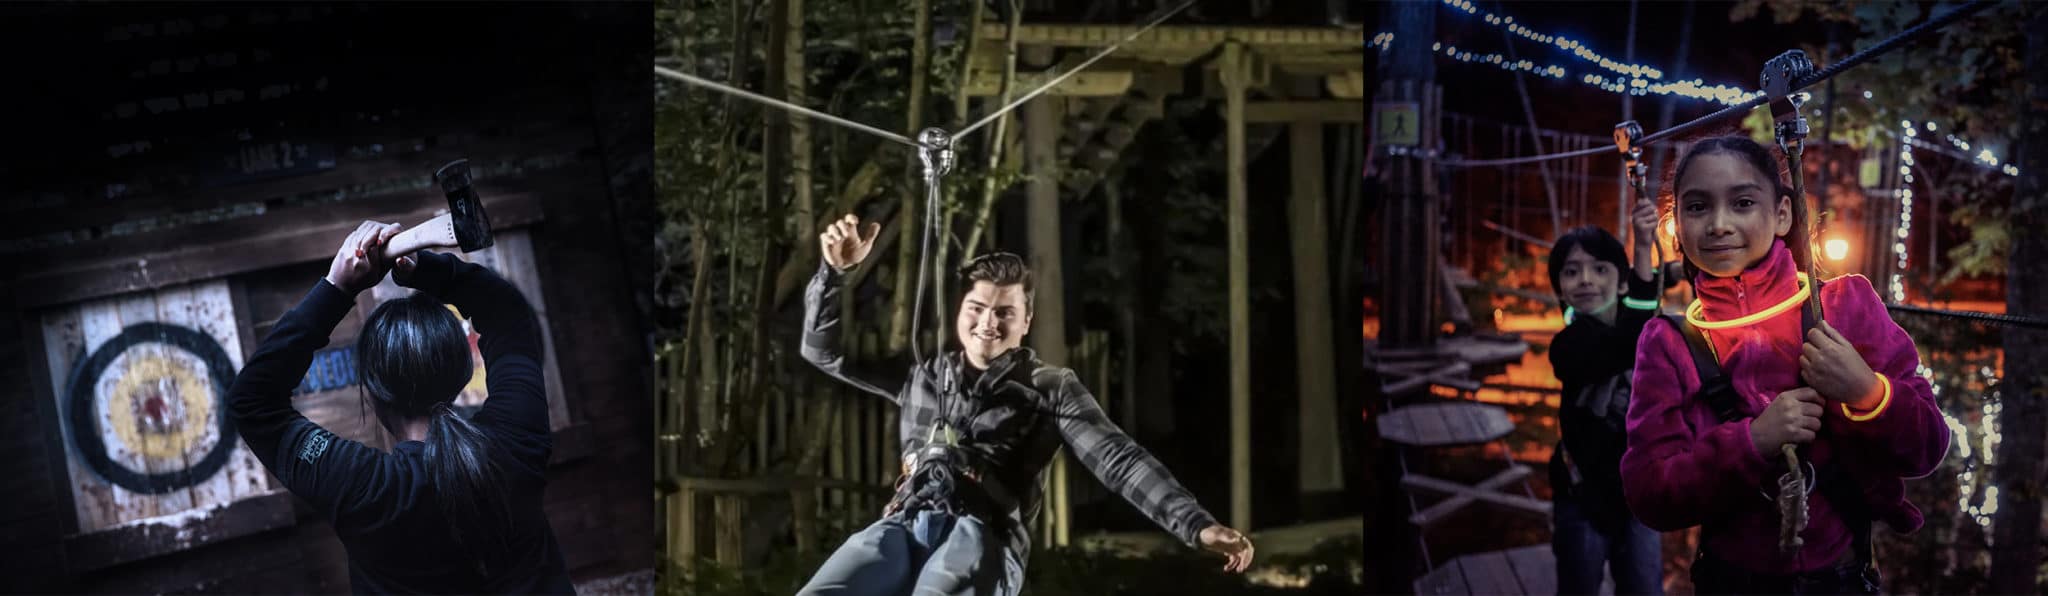 Visitors enjoying axe throwing, zip lines, and wearing glow in the dark necklaces while navigating treetop obstacles after sundown